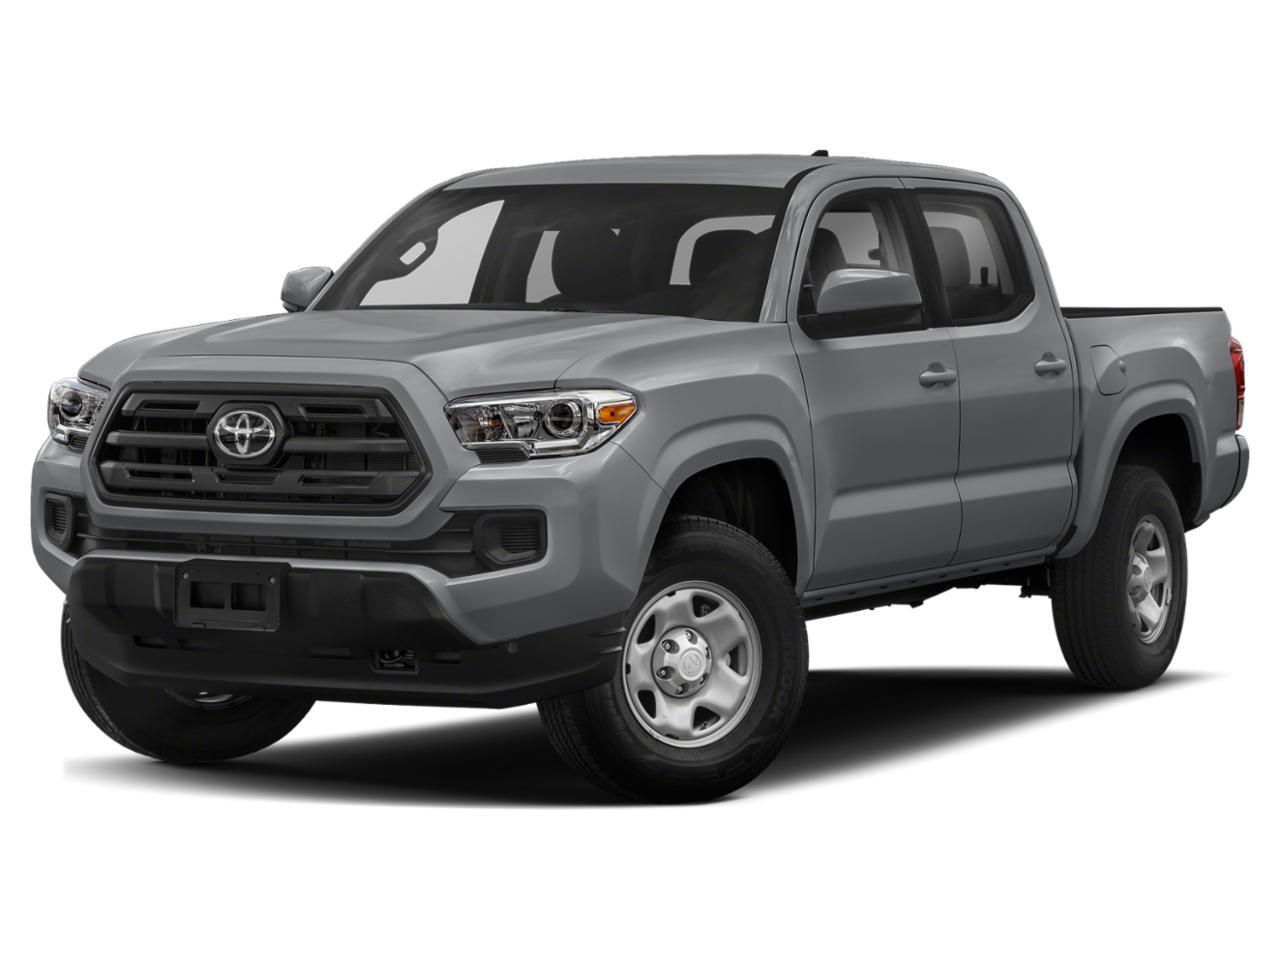 2019 Toyota Tacoma TRD Sport Upgrade 4X4, One Owner, Navigation, Roof